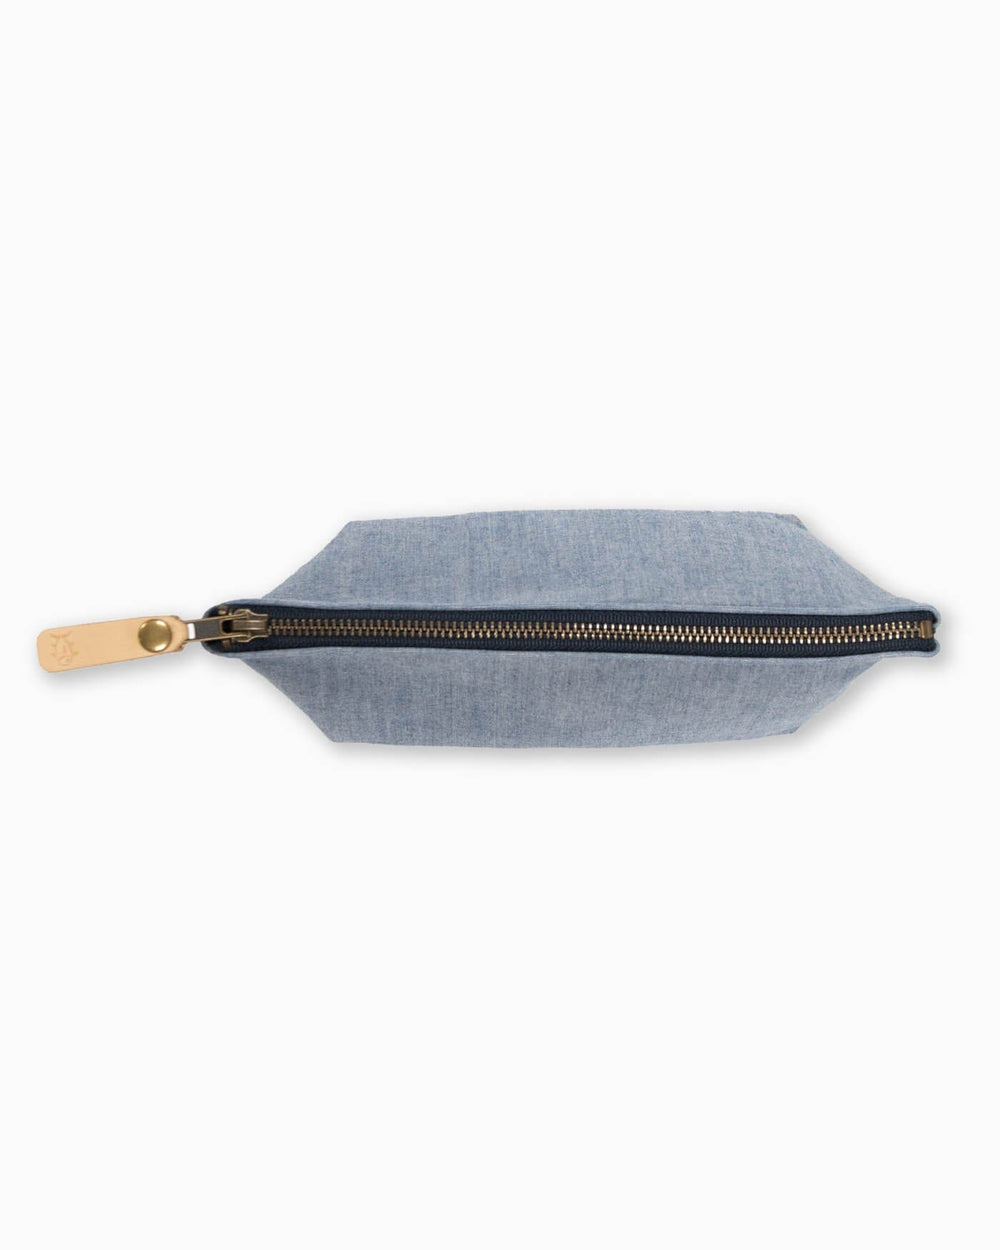 The top view of the Southern Tide Denim Travel Clutch by Southern Tide - Navy